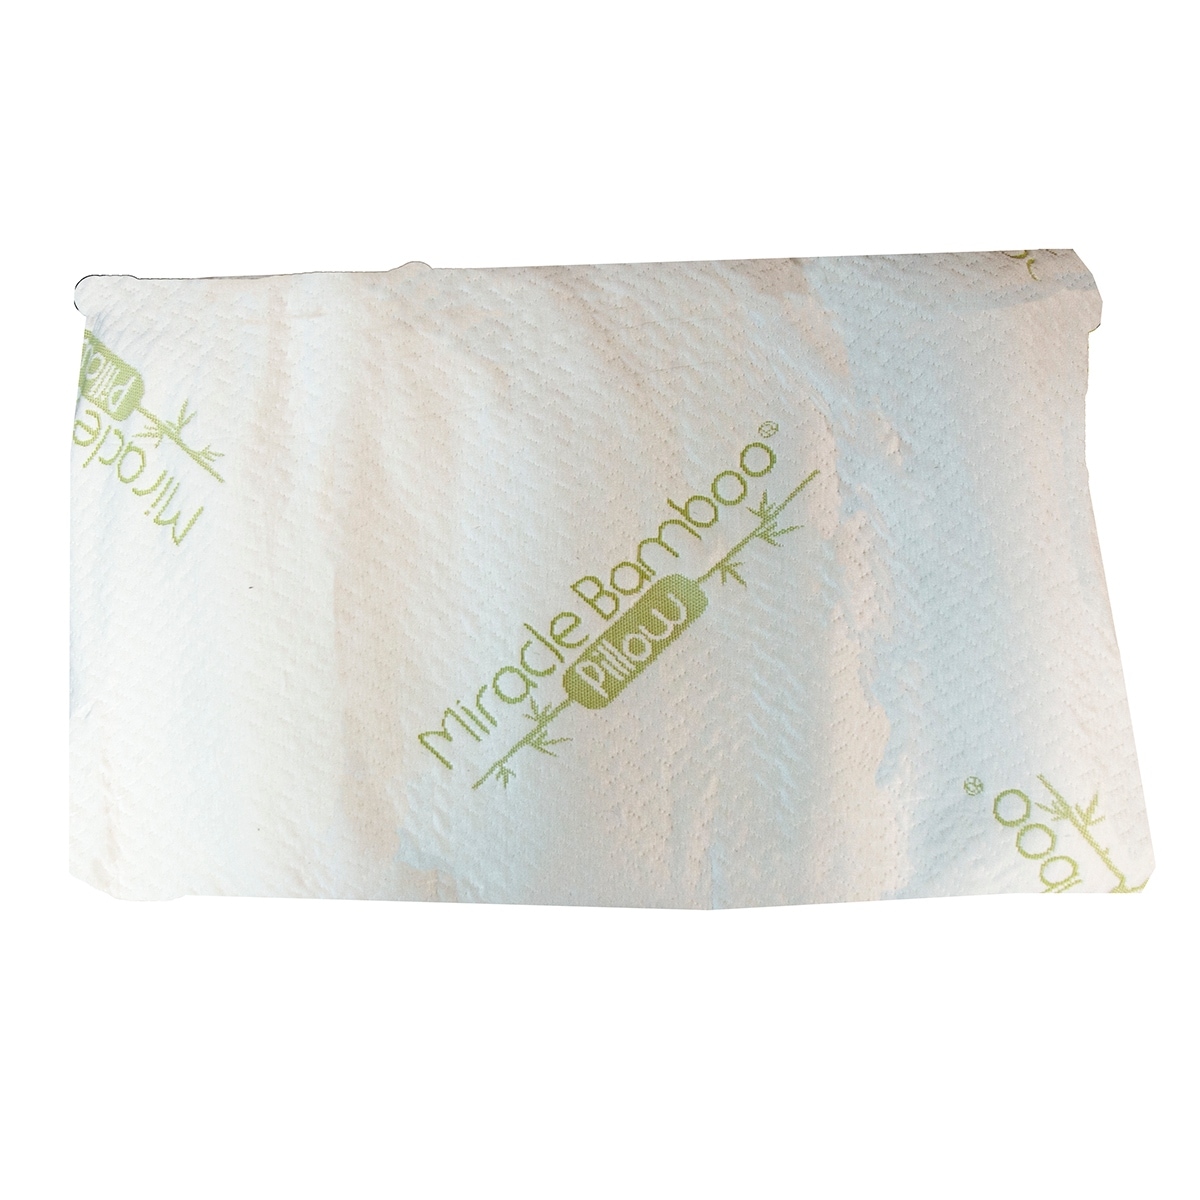 https://ak1.ostkcdn.com/images/products/is/images/direct/97adcb8271066b2cc2c953ceafb575e3983b00d4/Miracle-Bamboo-Shredded-Memory-Foam-Pillow---King%2C-White.jpg